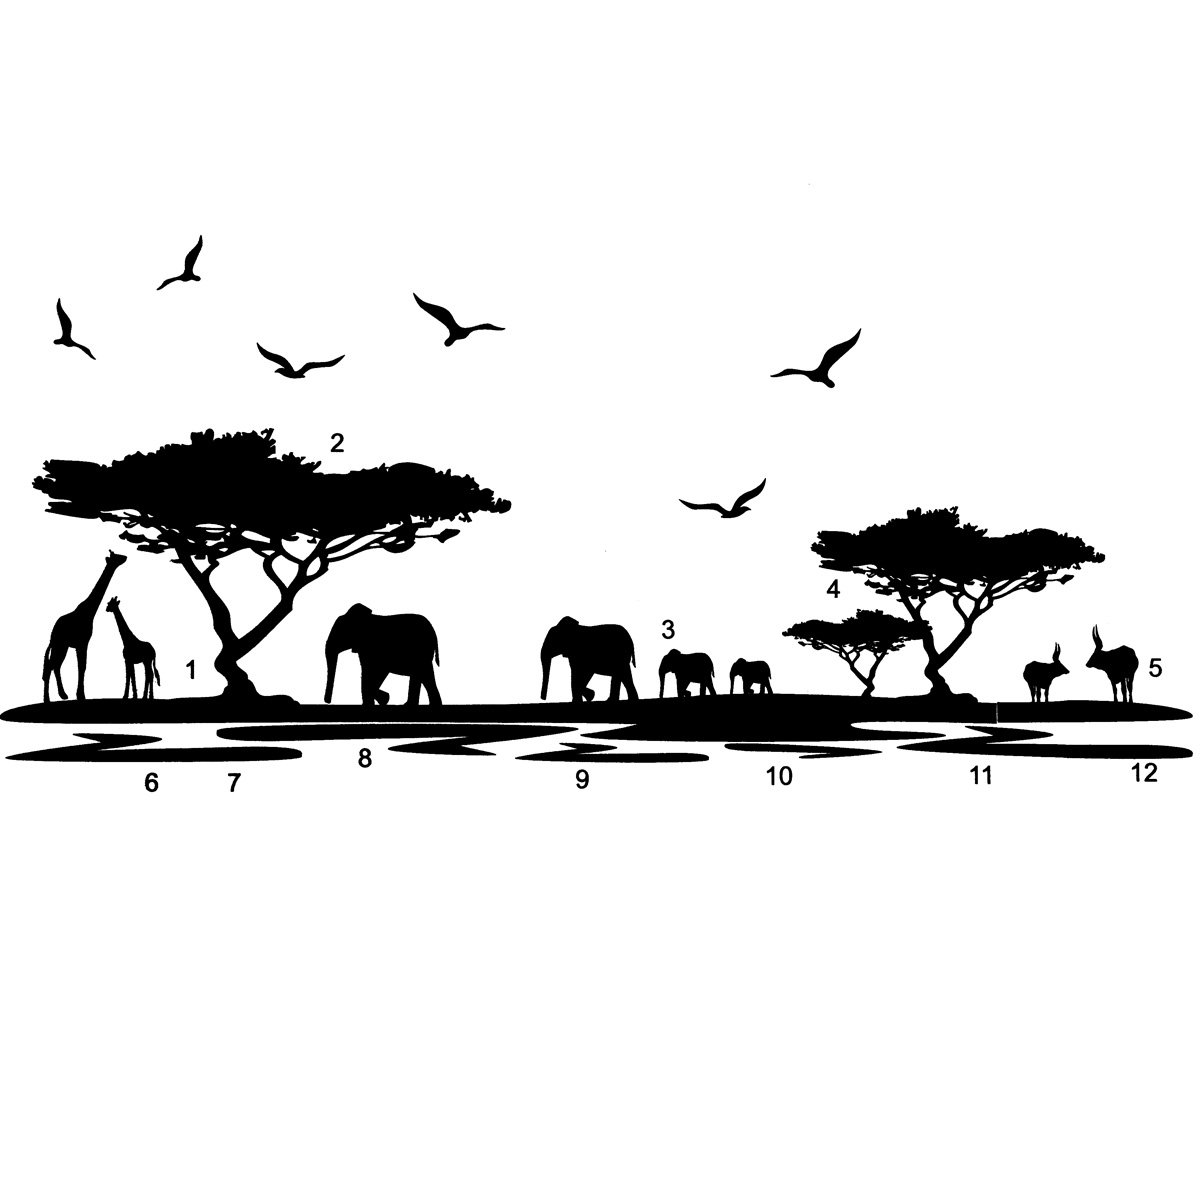 

African Elephant Animals Wall Stickers Black Mural Home Decal Removable Art Vinyl Room Decor DIY